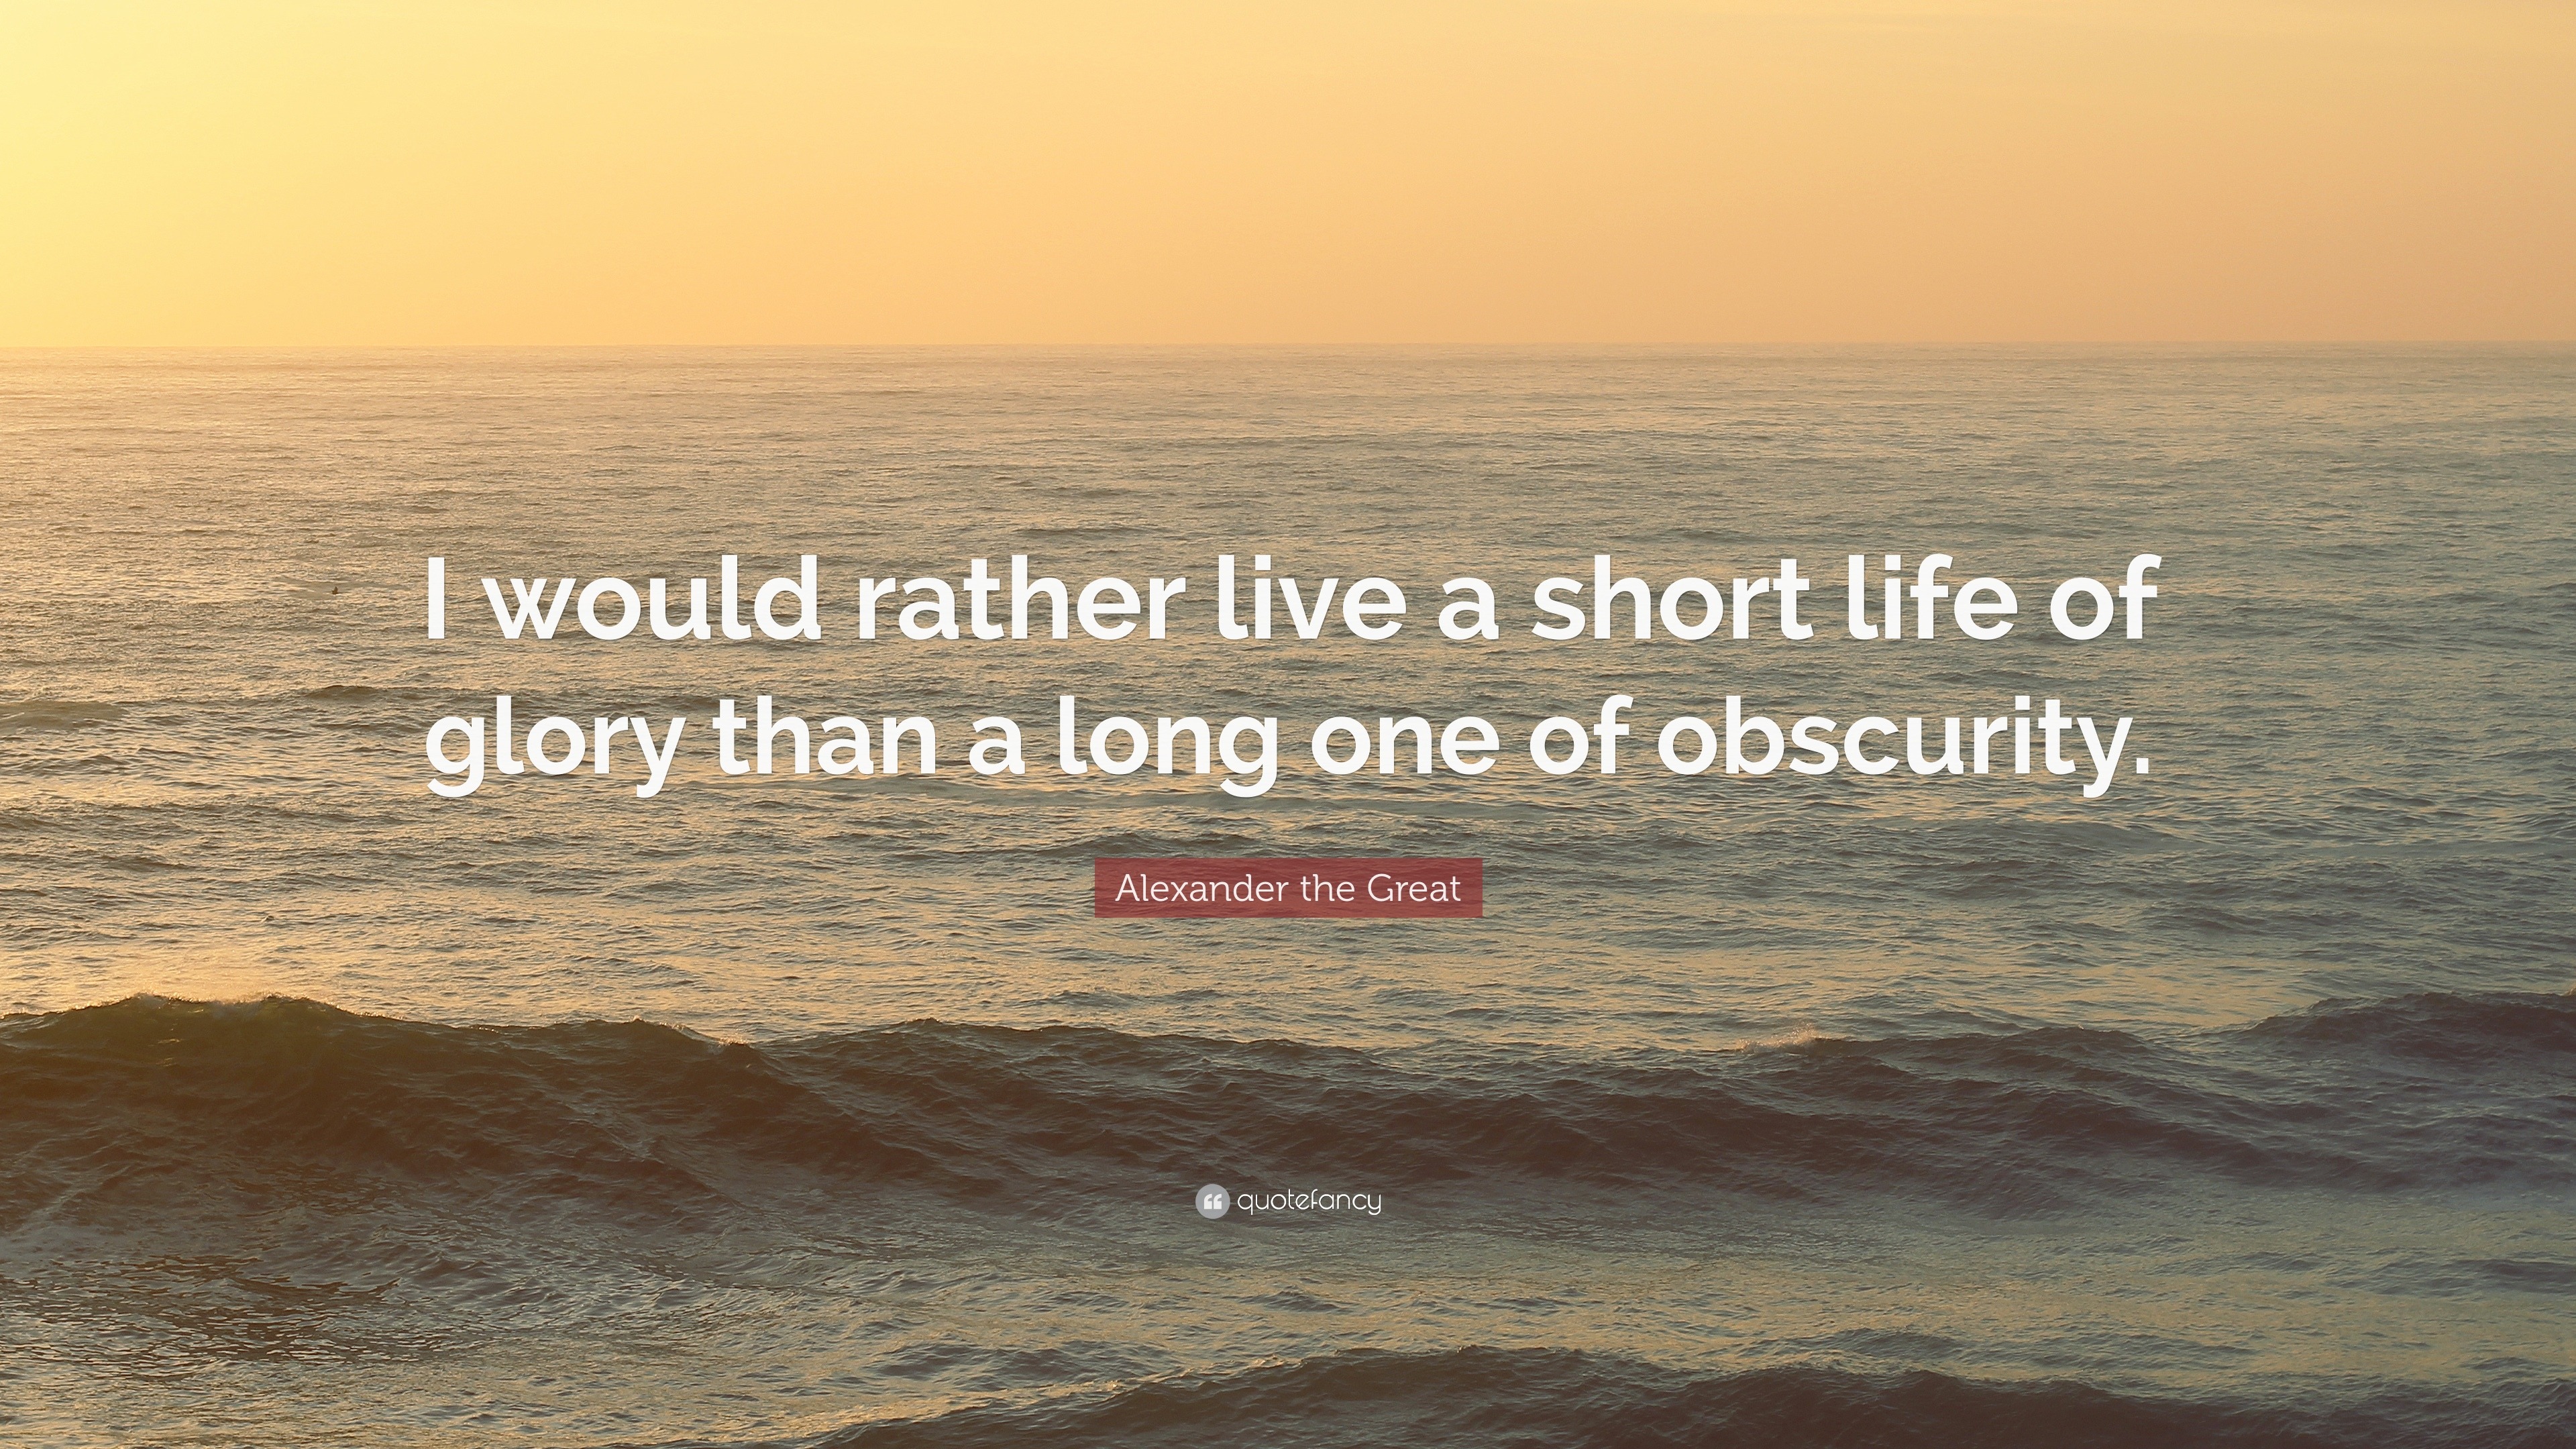 Alexander the Great Quote: “I would rather live a short life of glory ...